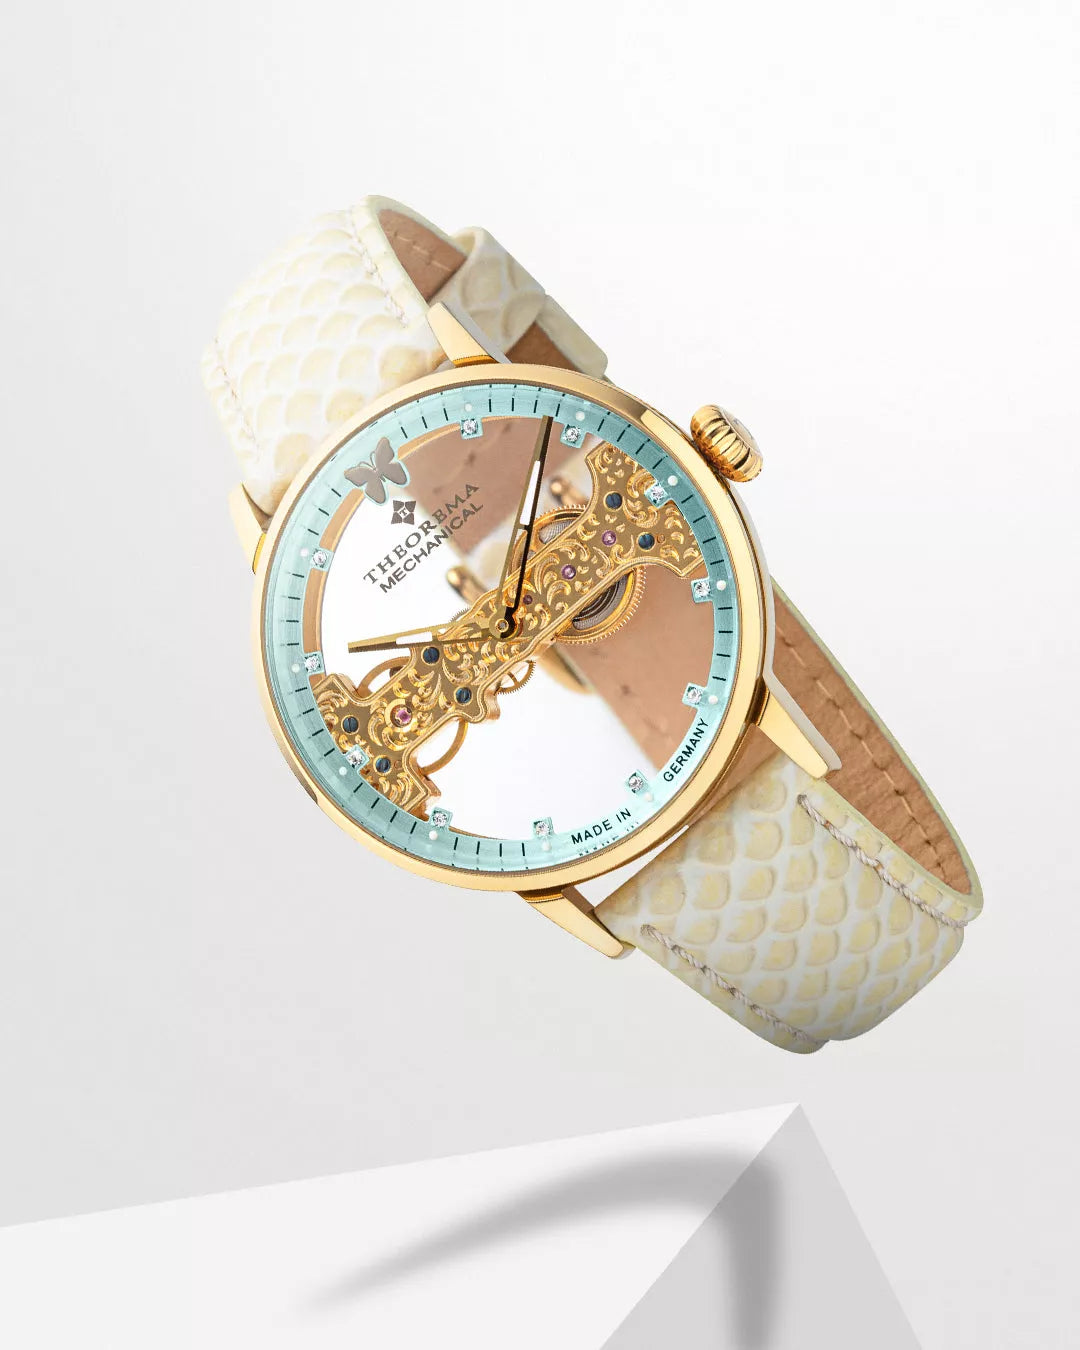 A Tufina watch is the perfect Valentine's Day gift for her.